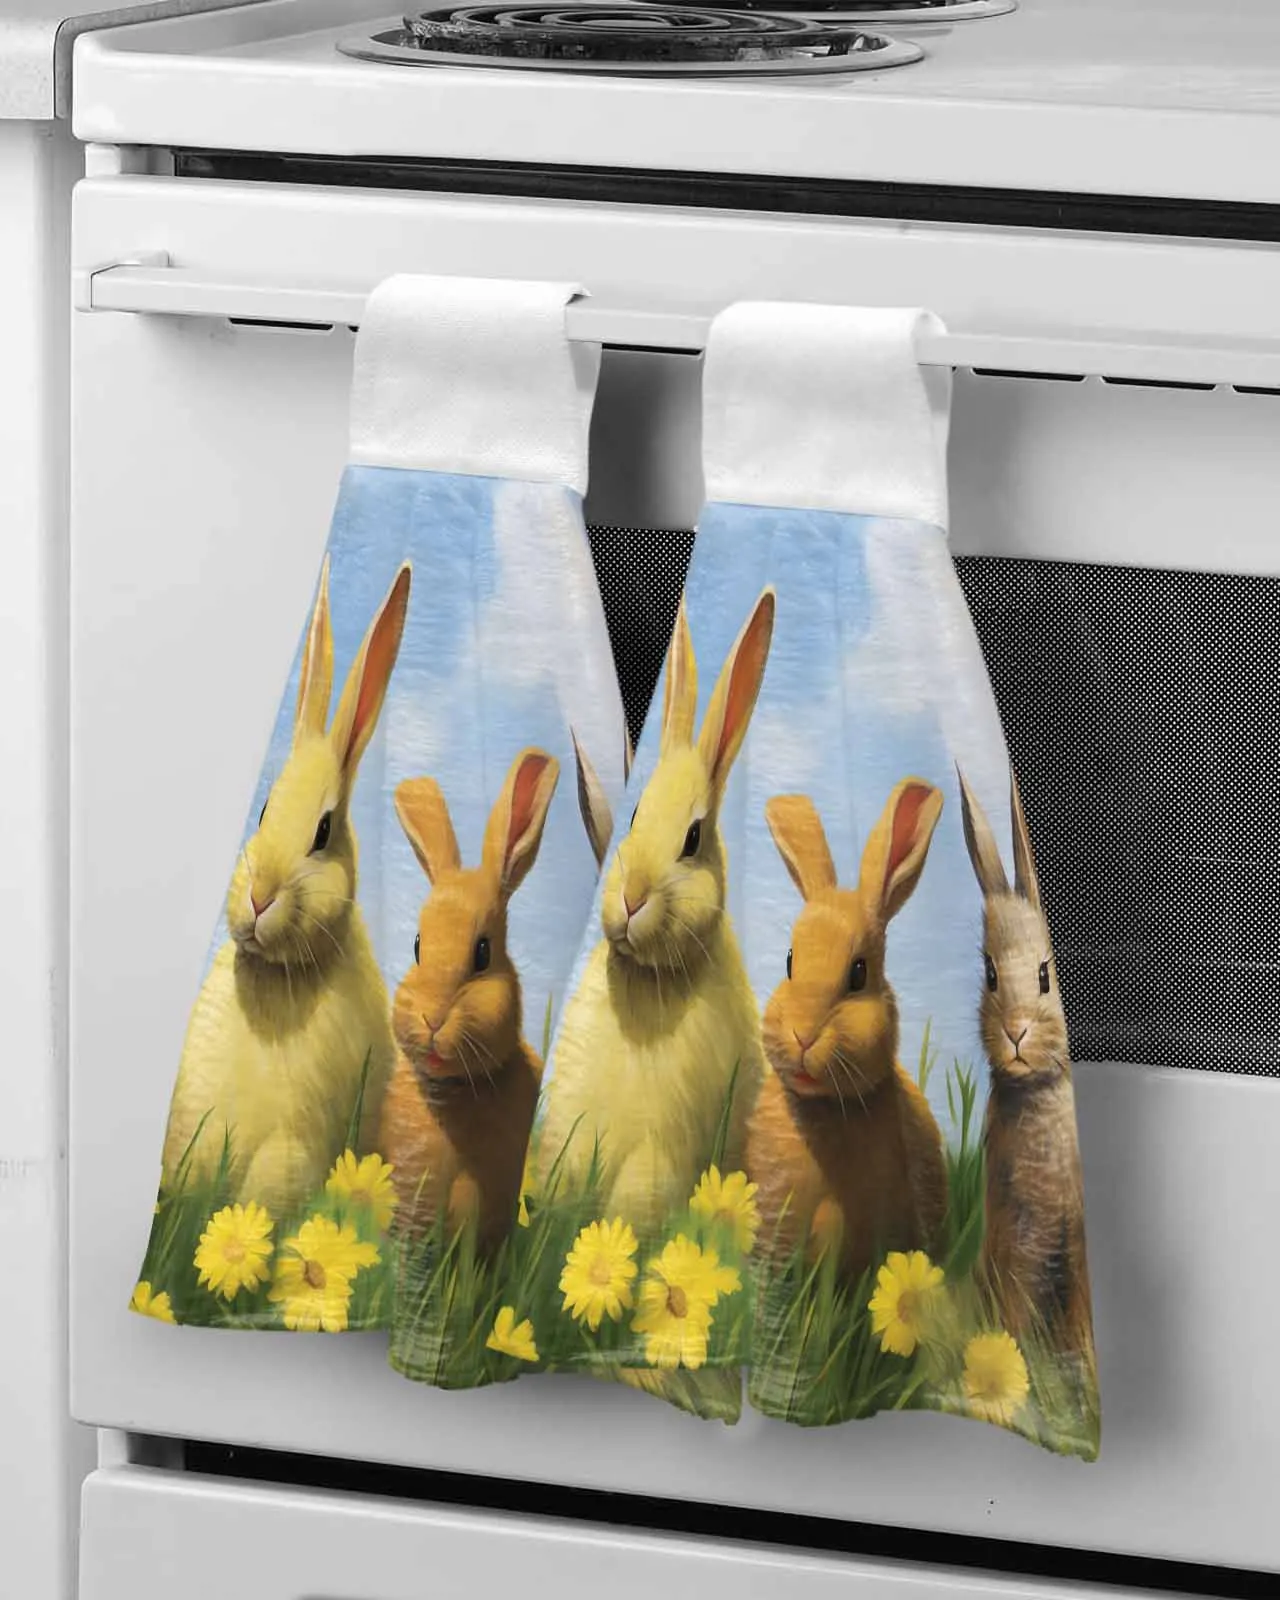 

Easter Egg Bunny Daisy Hand Towels Kitchen Bathroom Hanging Cloth Quick Dry Soft Absorbent Microfiber Towels